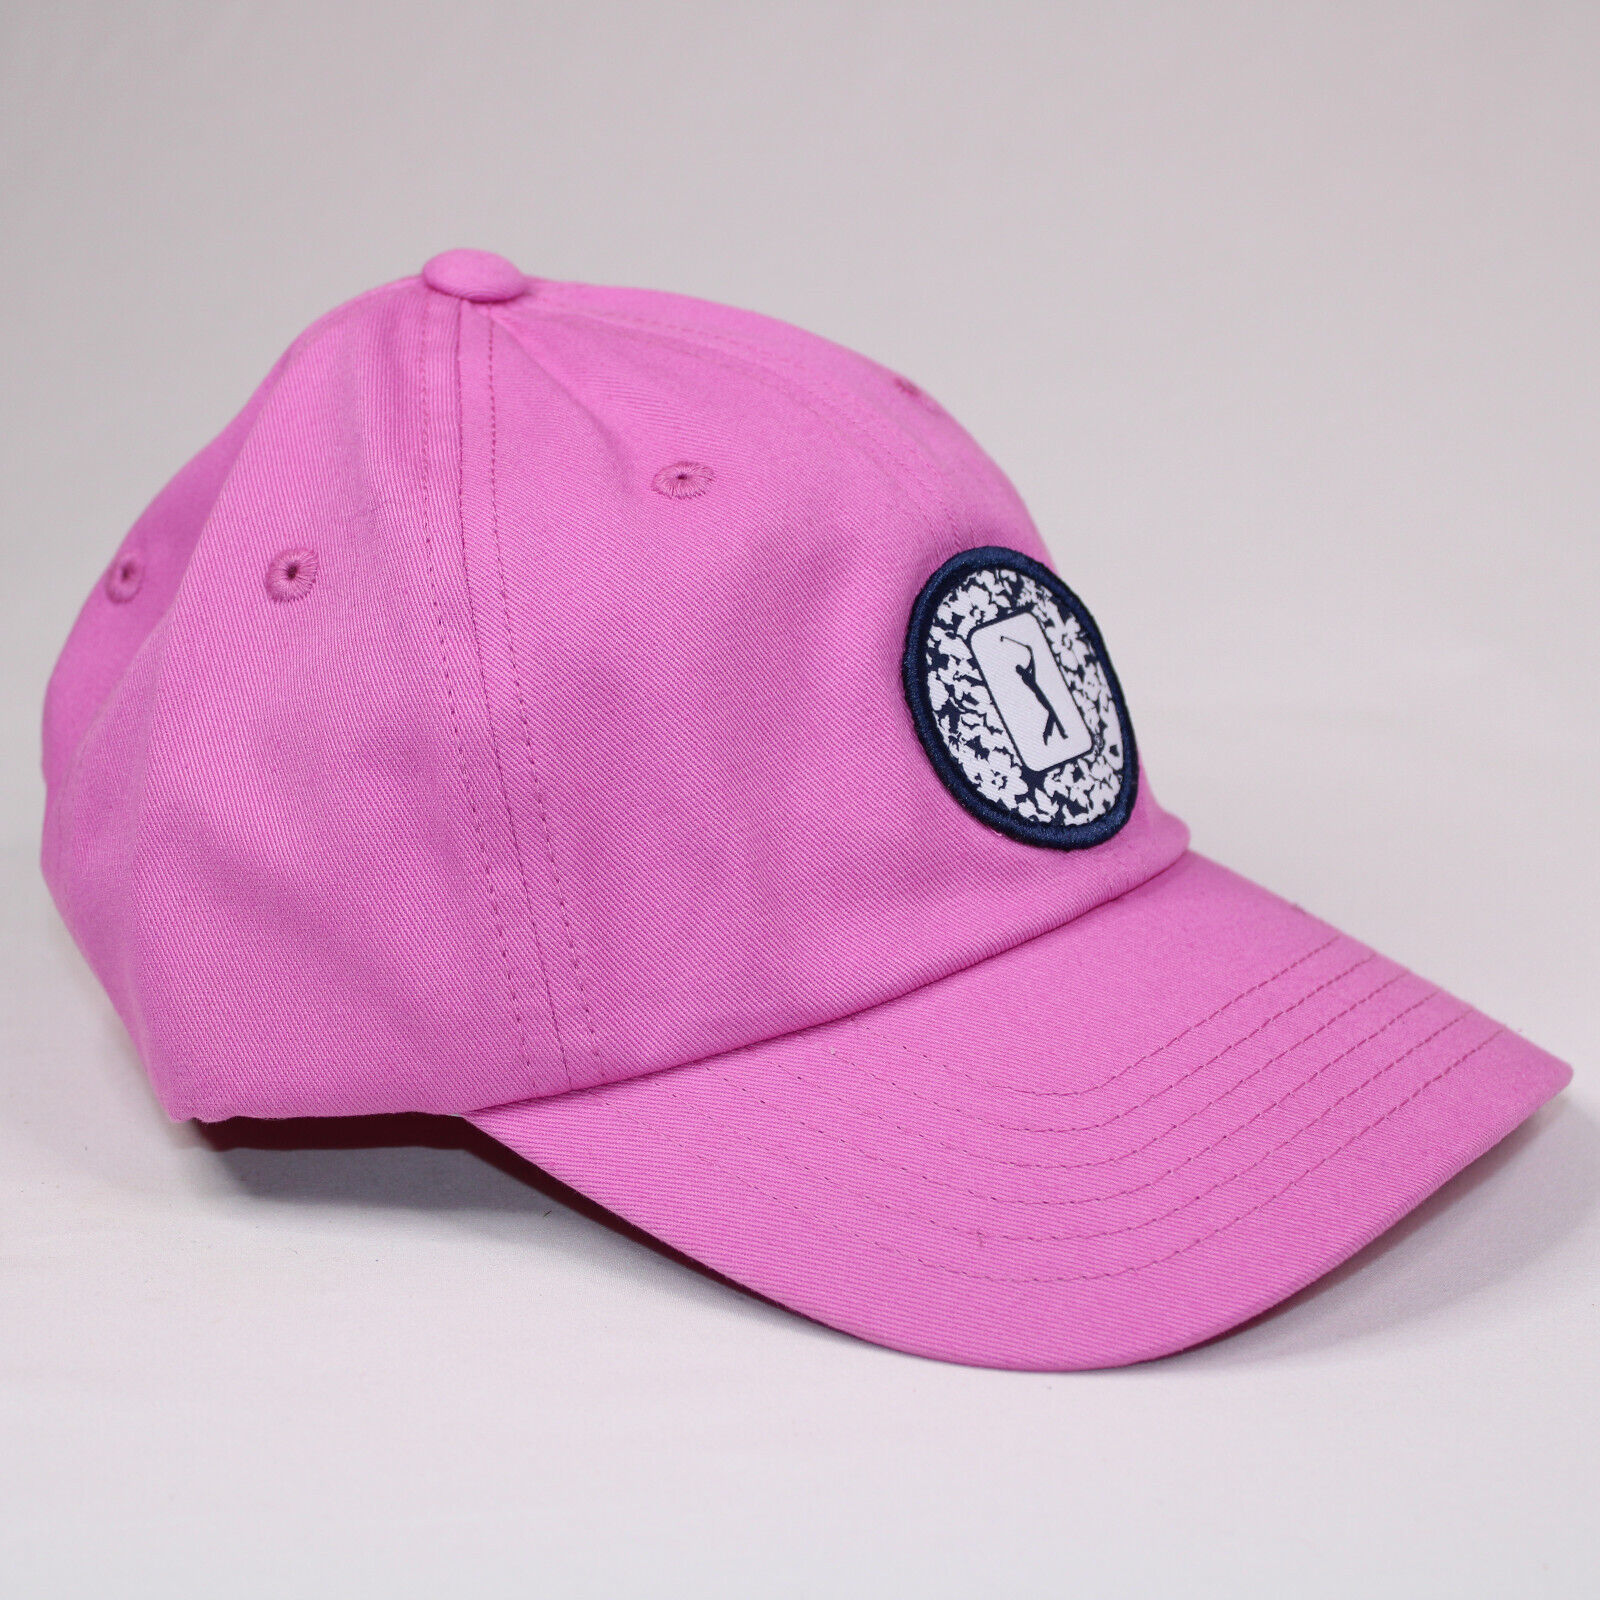 Primary image for PGA Tour Women's Adjustable Golf Hat PINK With Floral Patch New Baseball Cap Hat